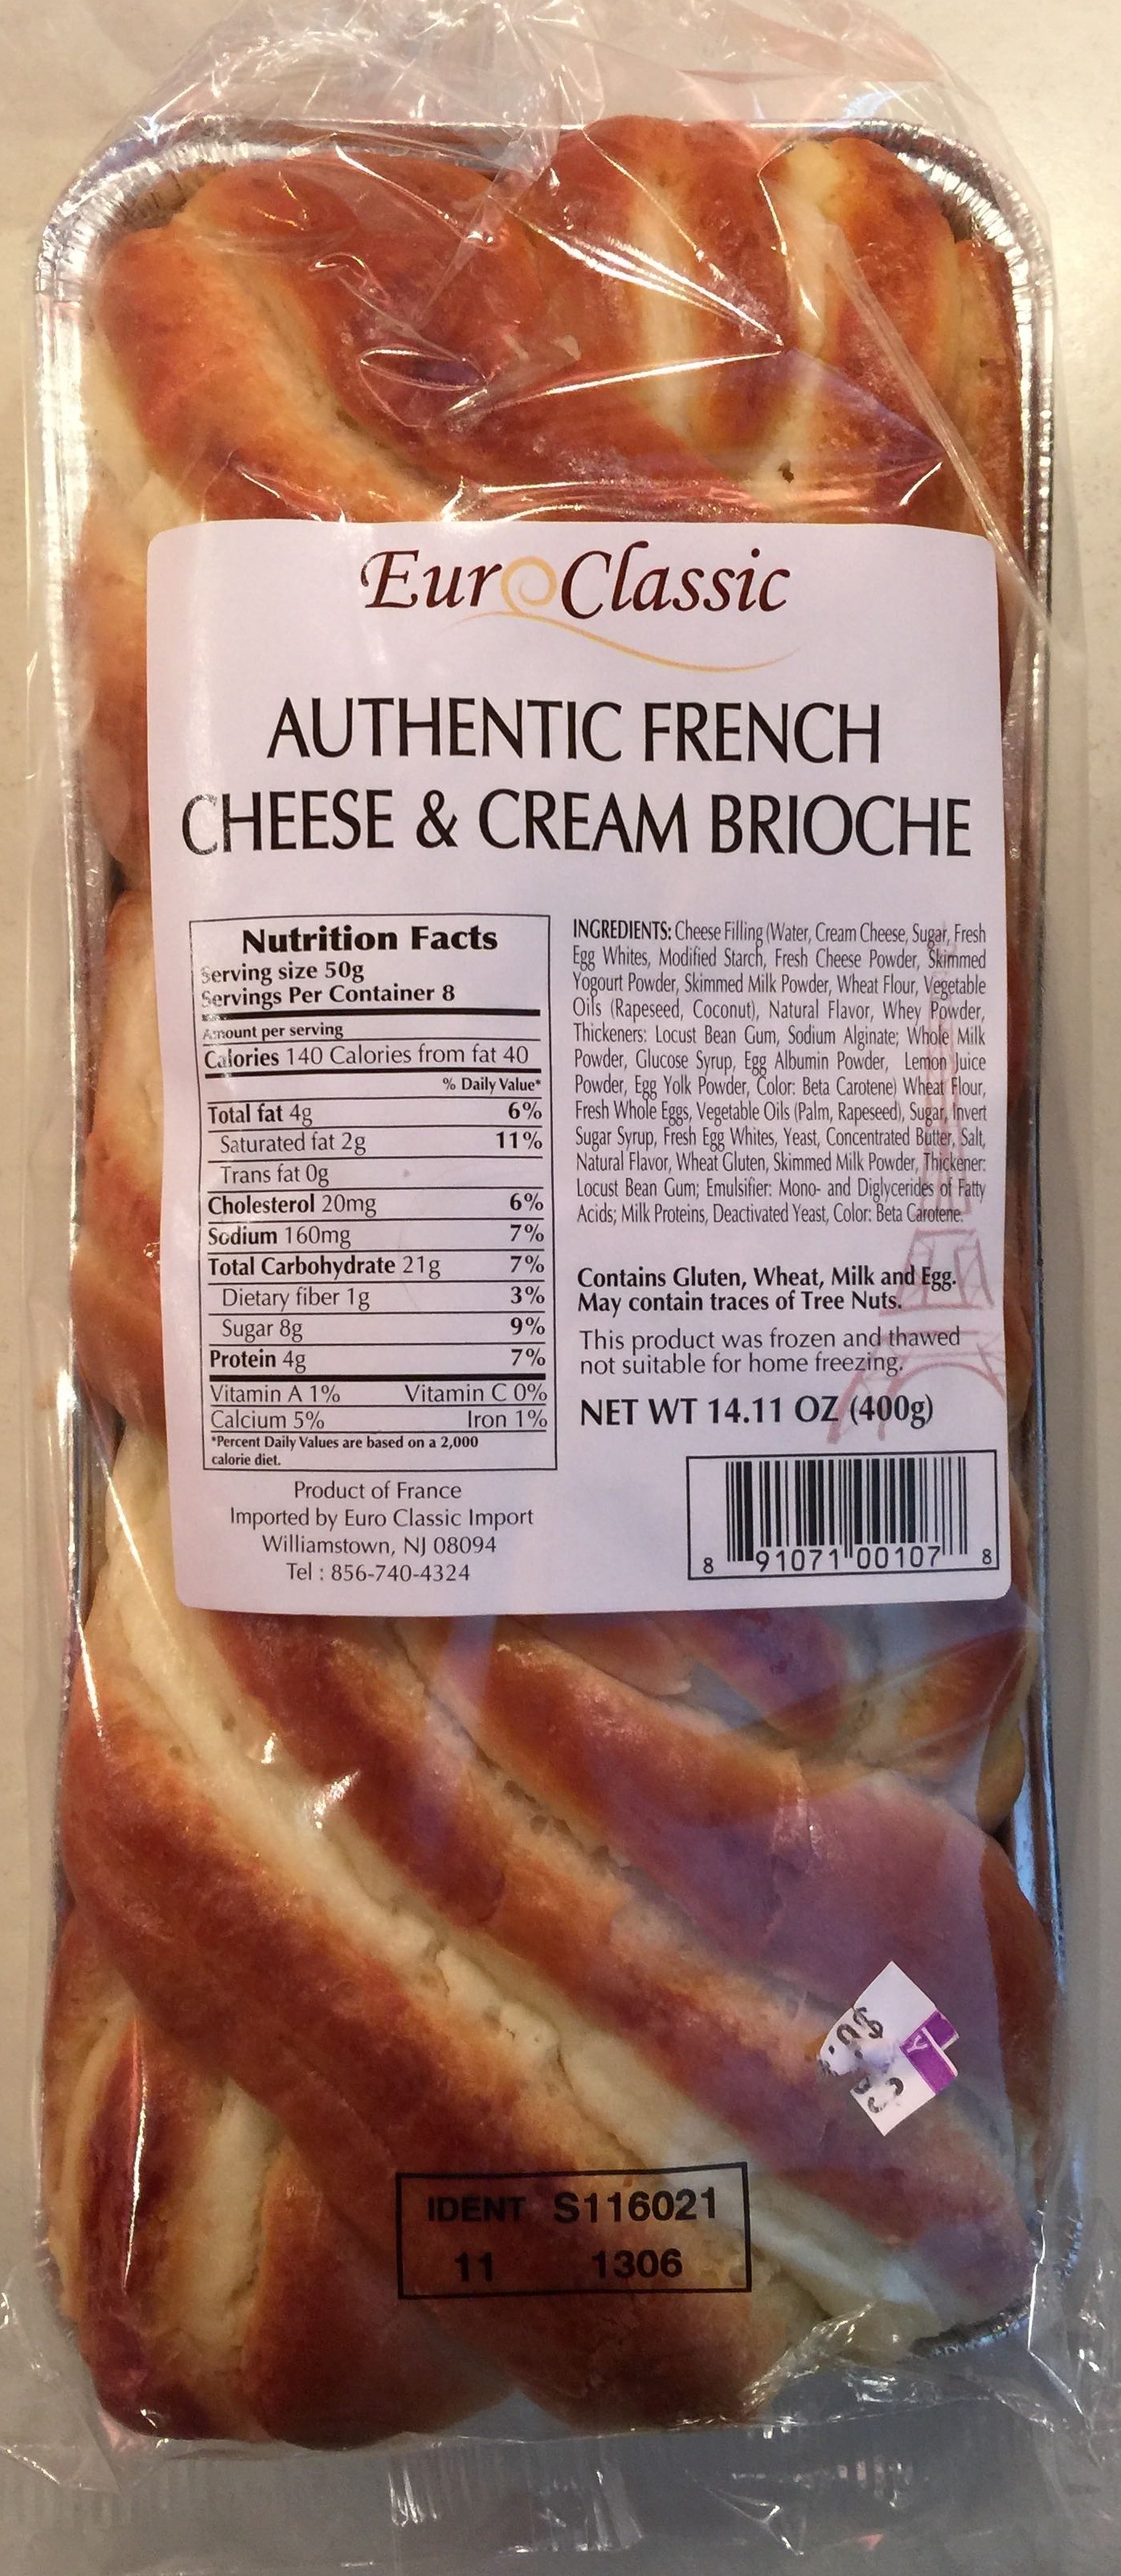 Euro classic imports, authentic french cheese & cream brioche - Produkt - en